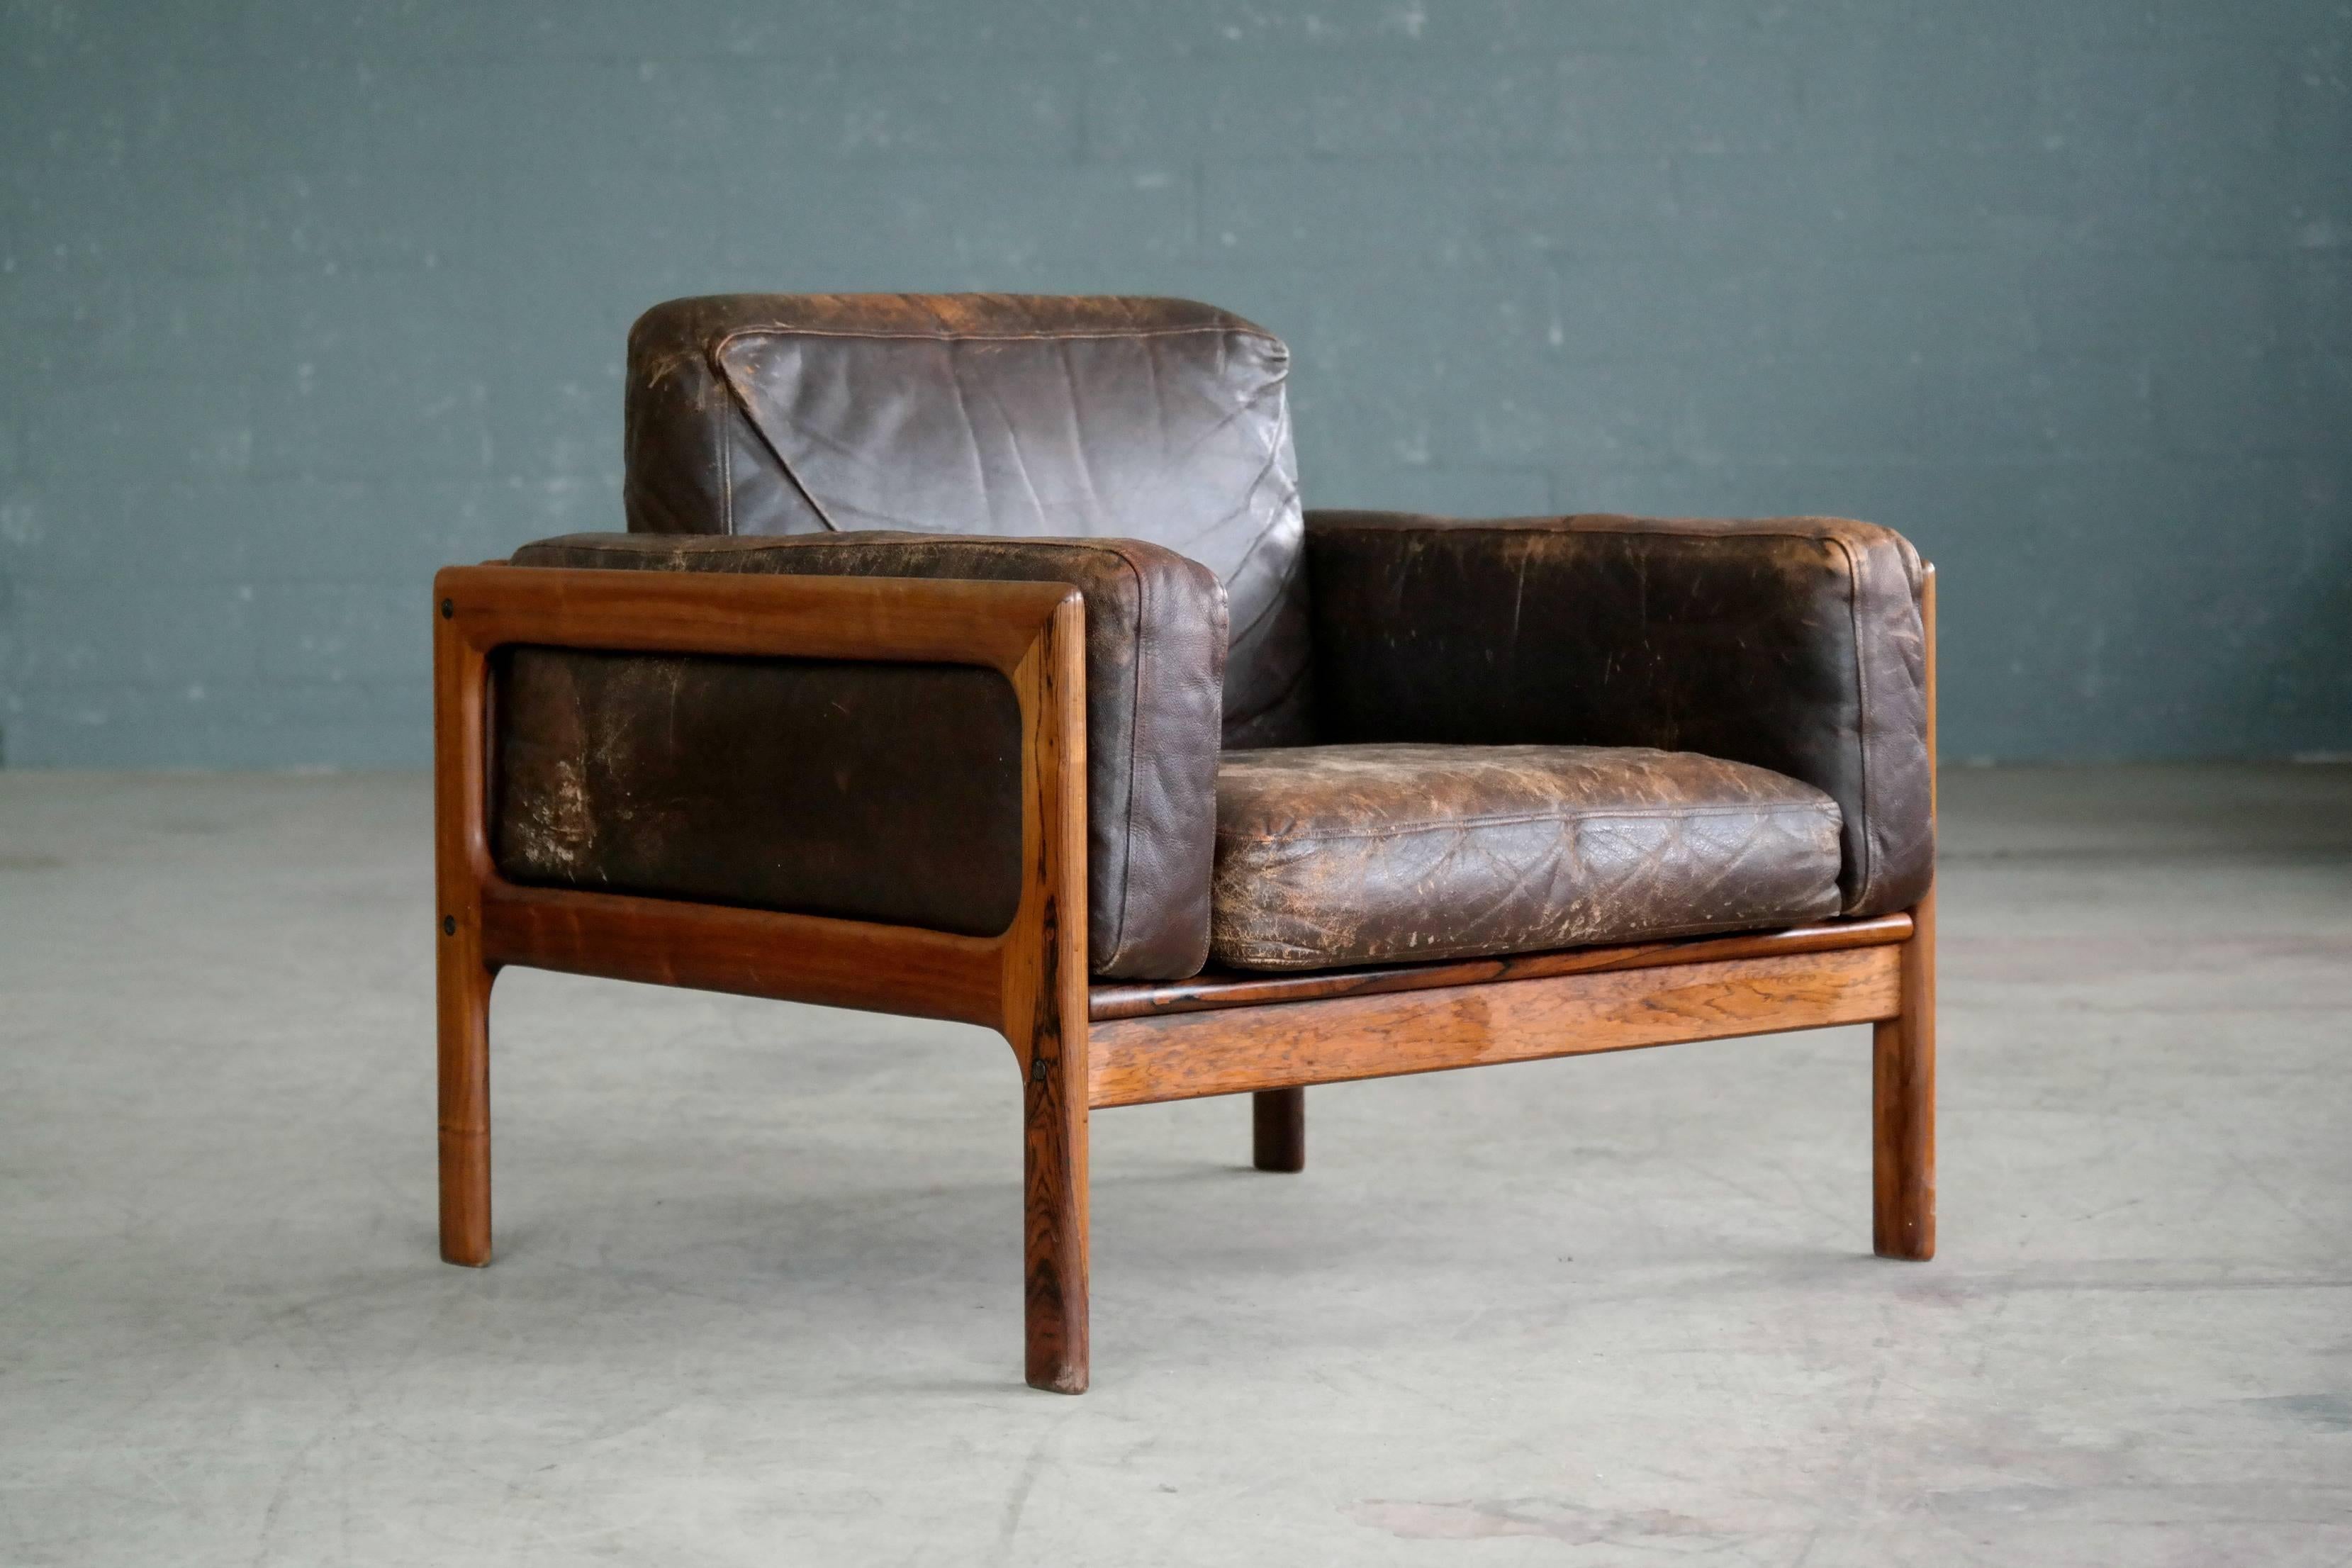 Mid-Century Modern Arne Wahl Iversen Pair of Easy Chairs in Rosewood and Leather for Komfort Mobler